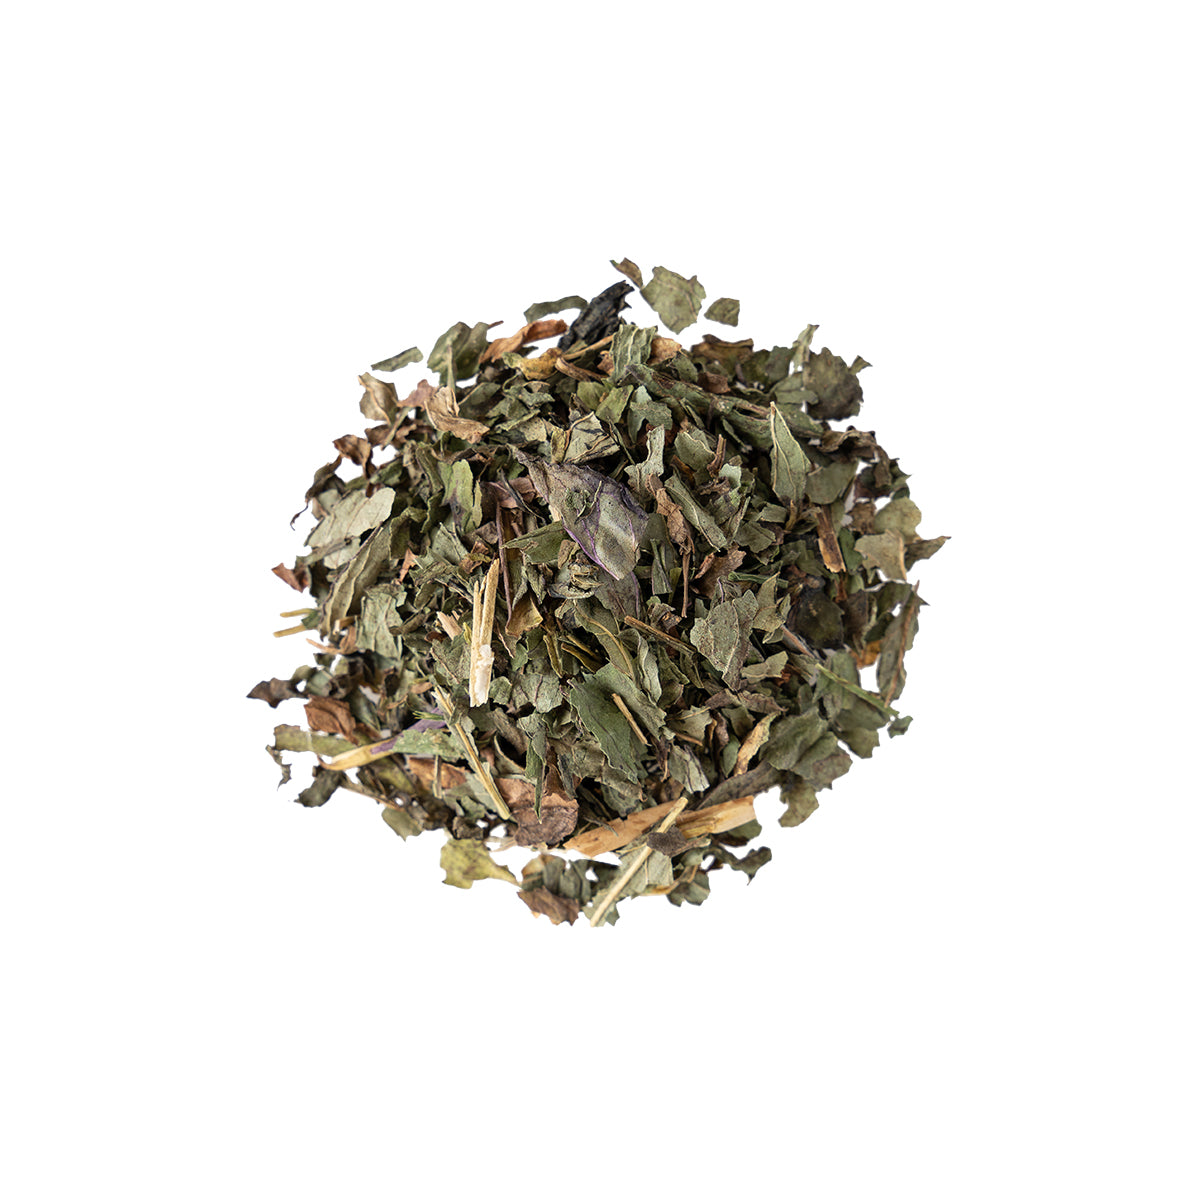 Primary Image of Peppermint Tea (Mentha piperita)